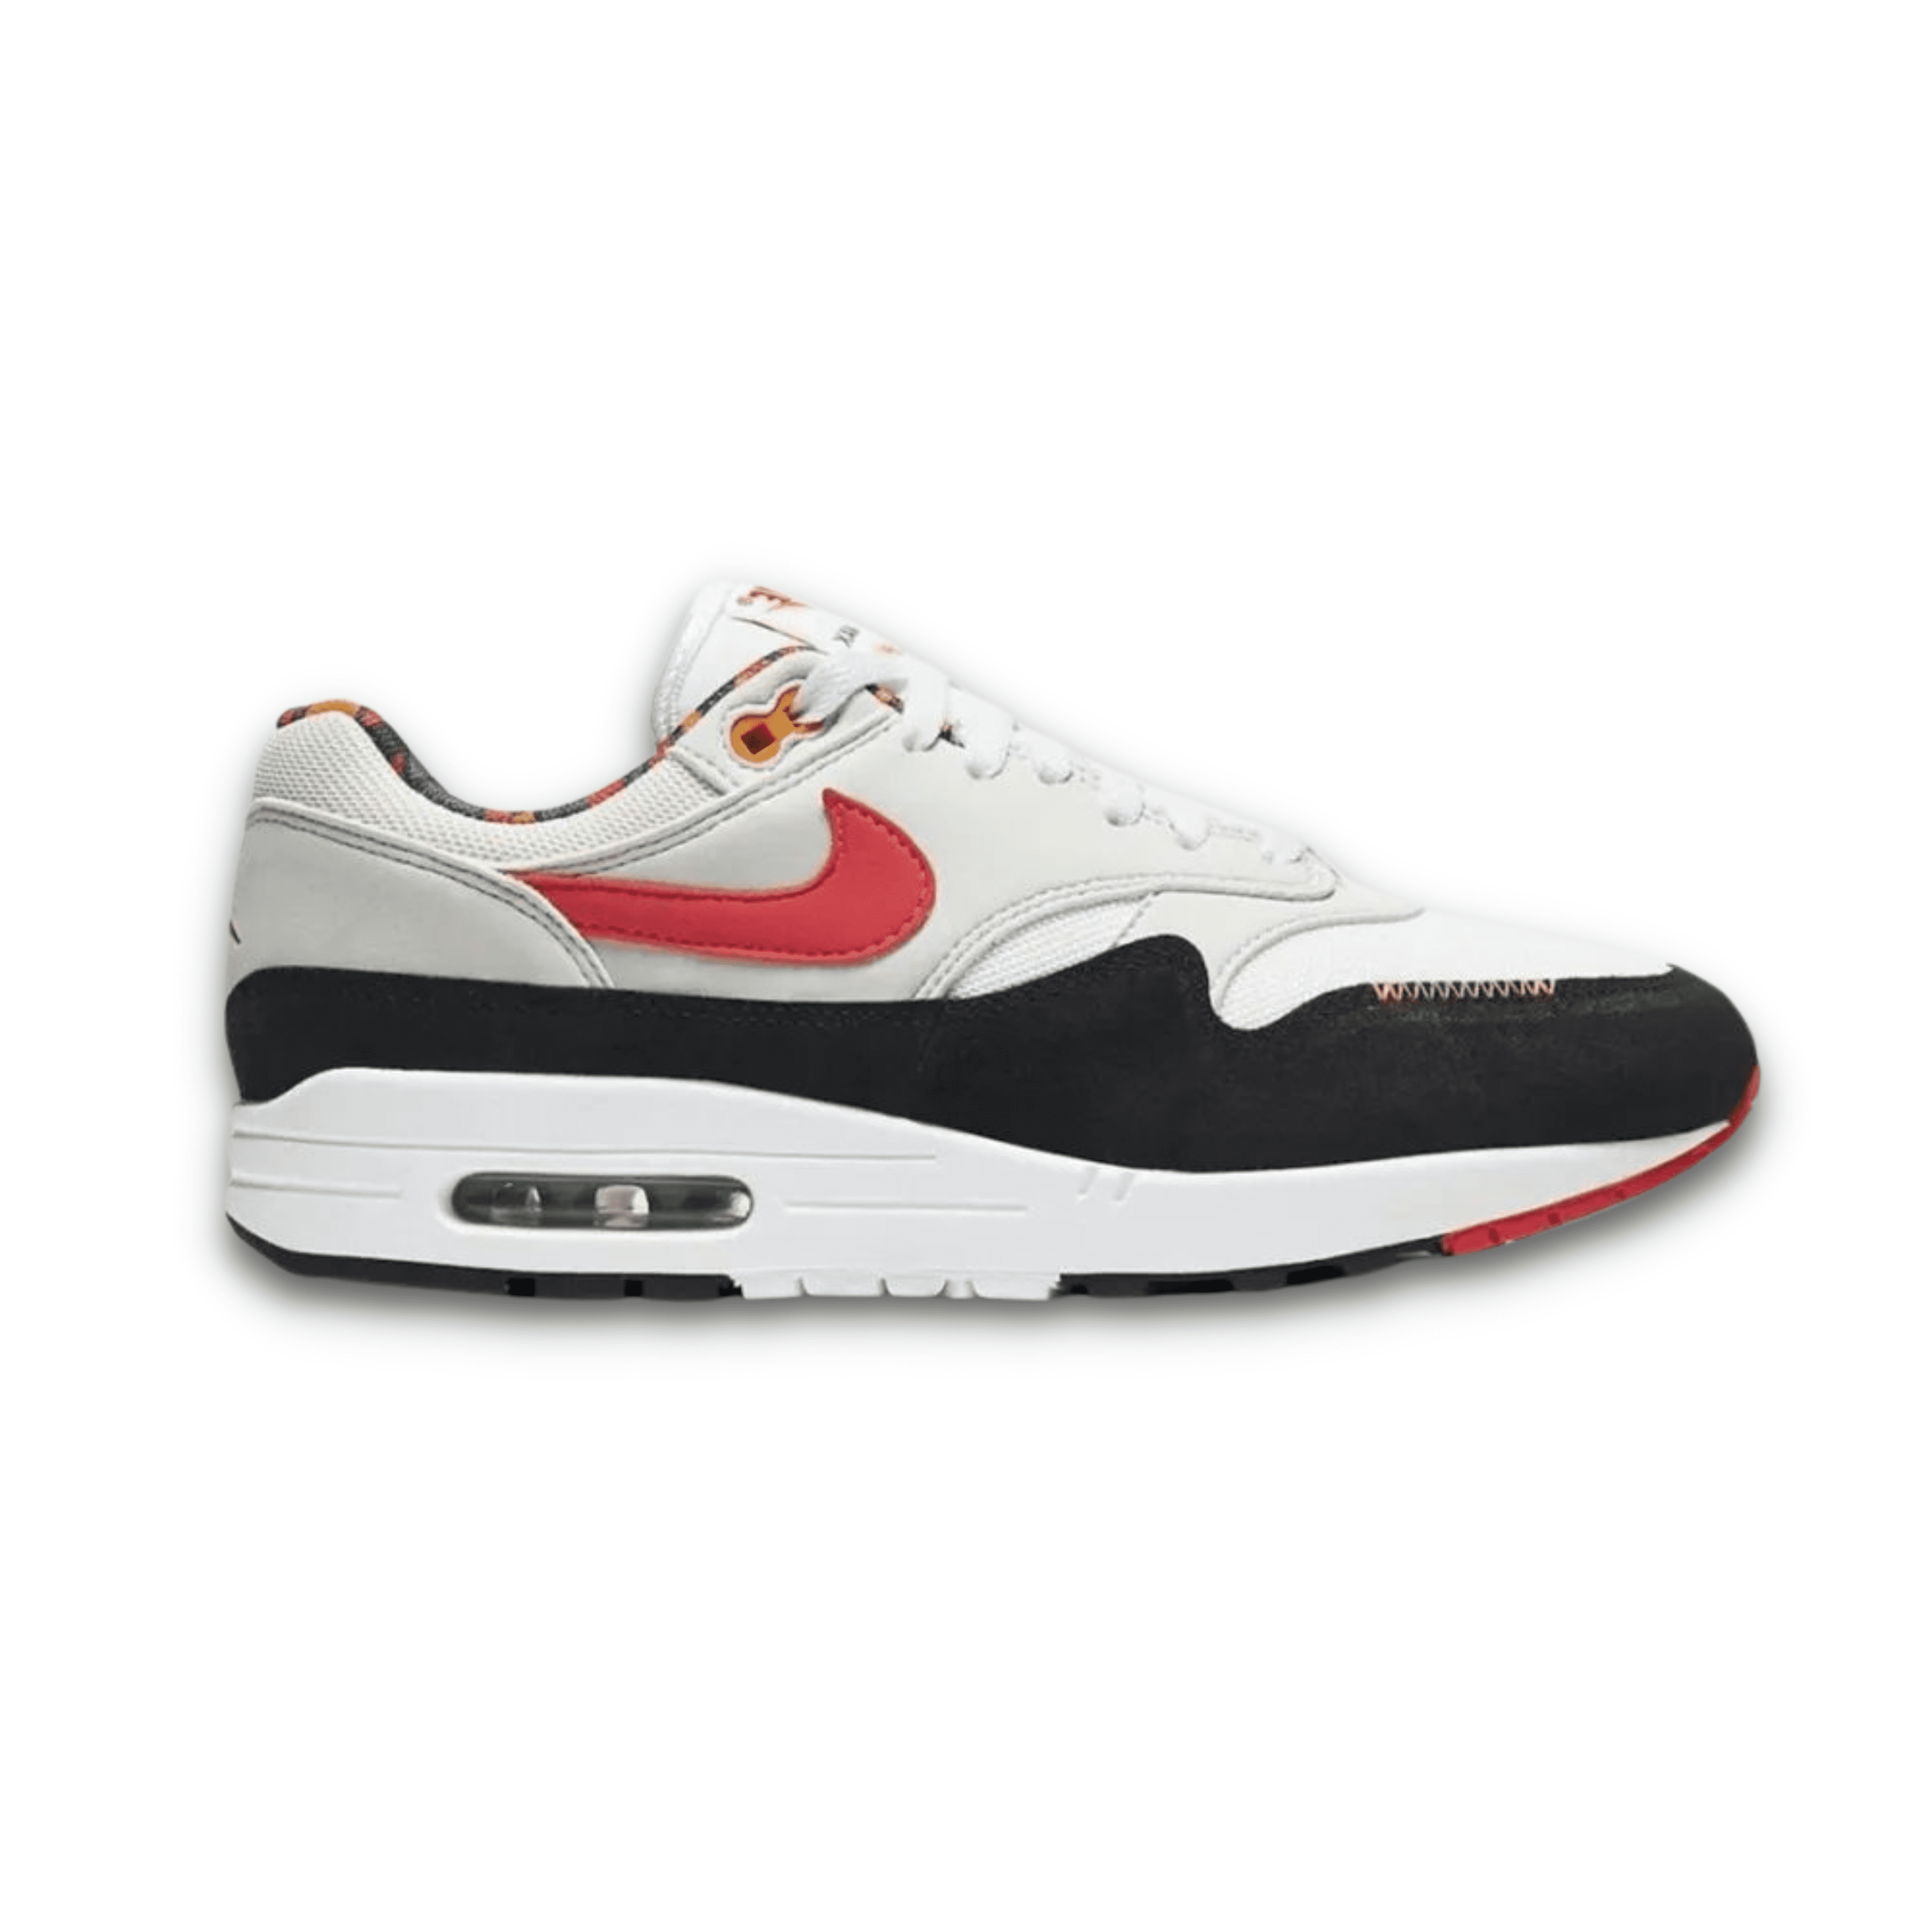 NIKE AIR MAX 1 LIVE TOGETHER PLAY - Golden Store